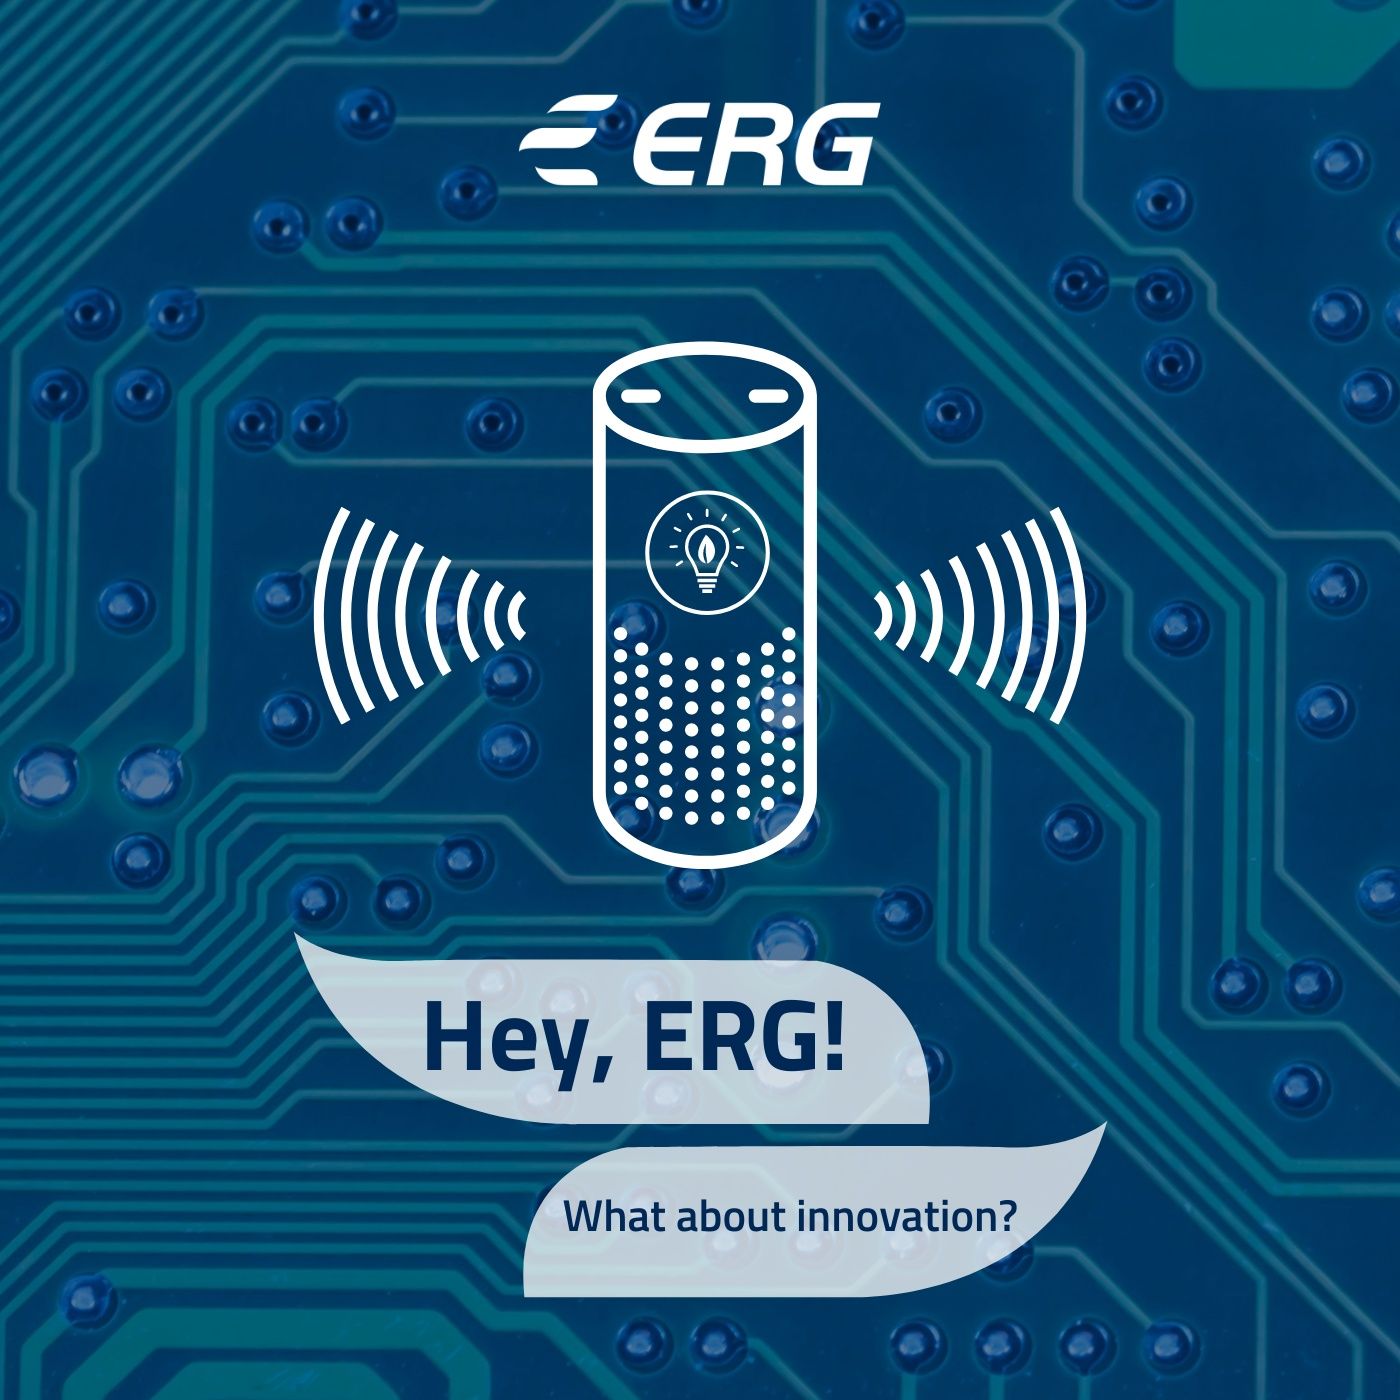 Hey, ERG: what about innovation?